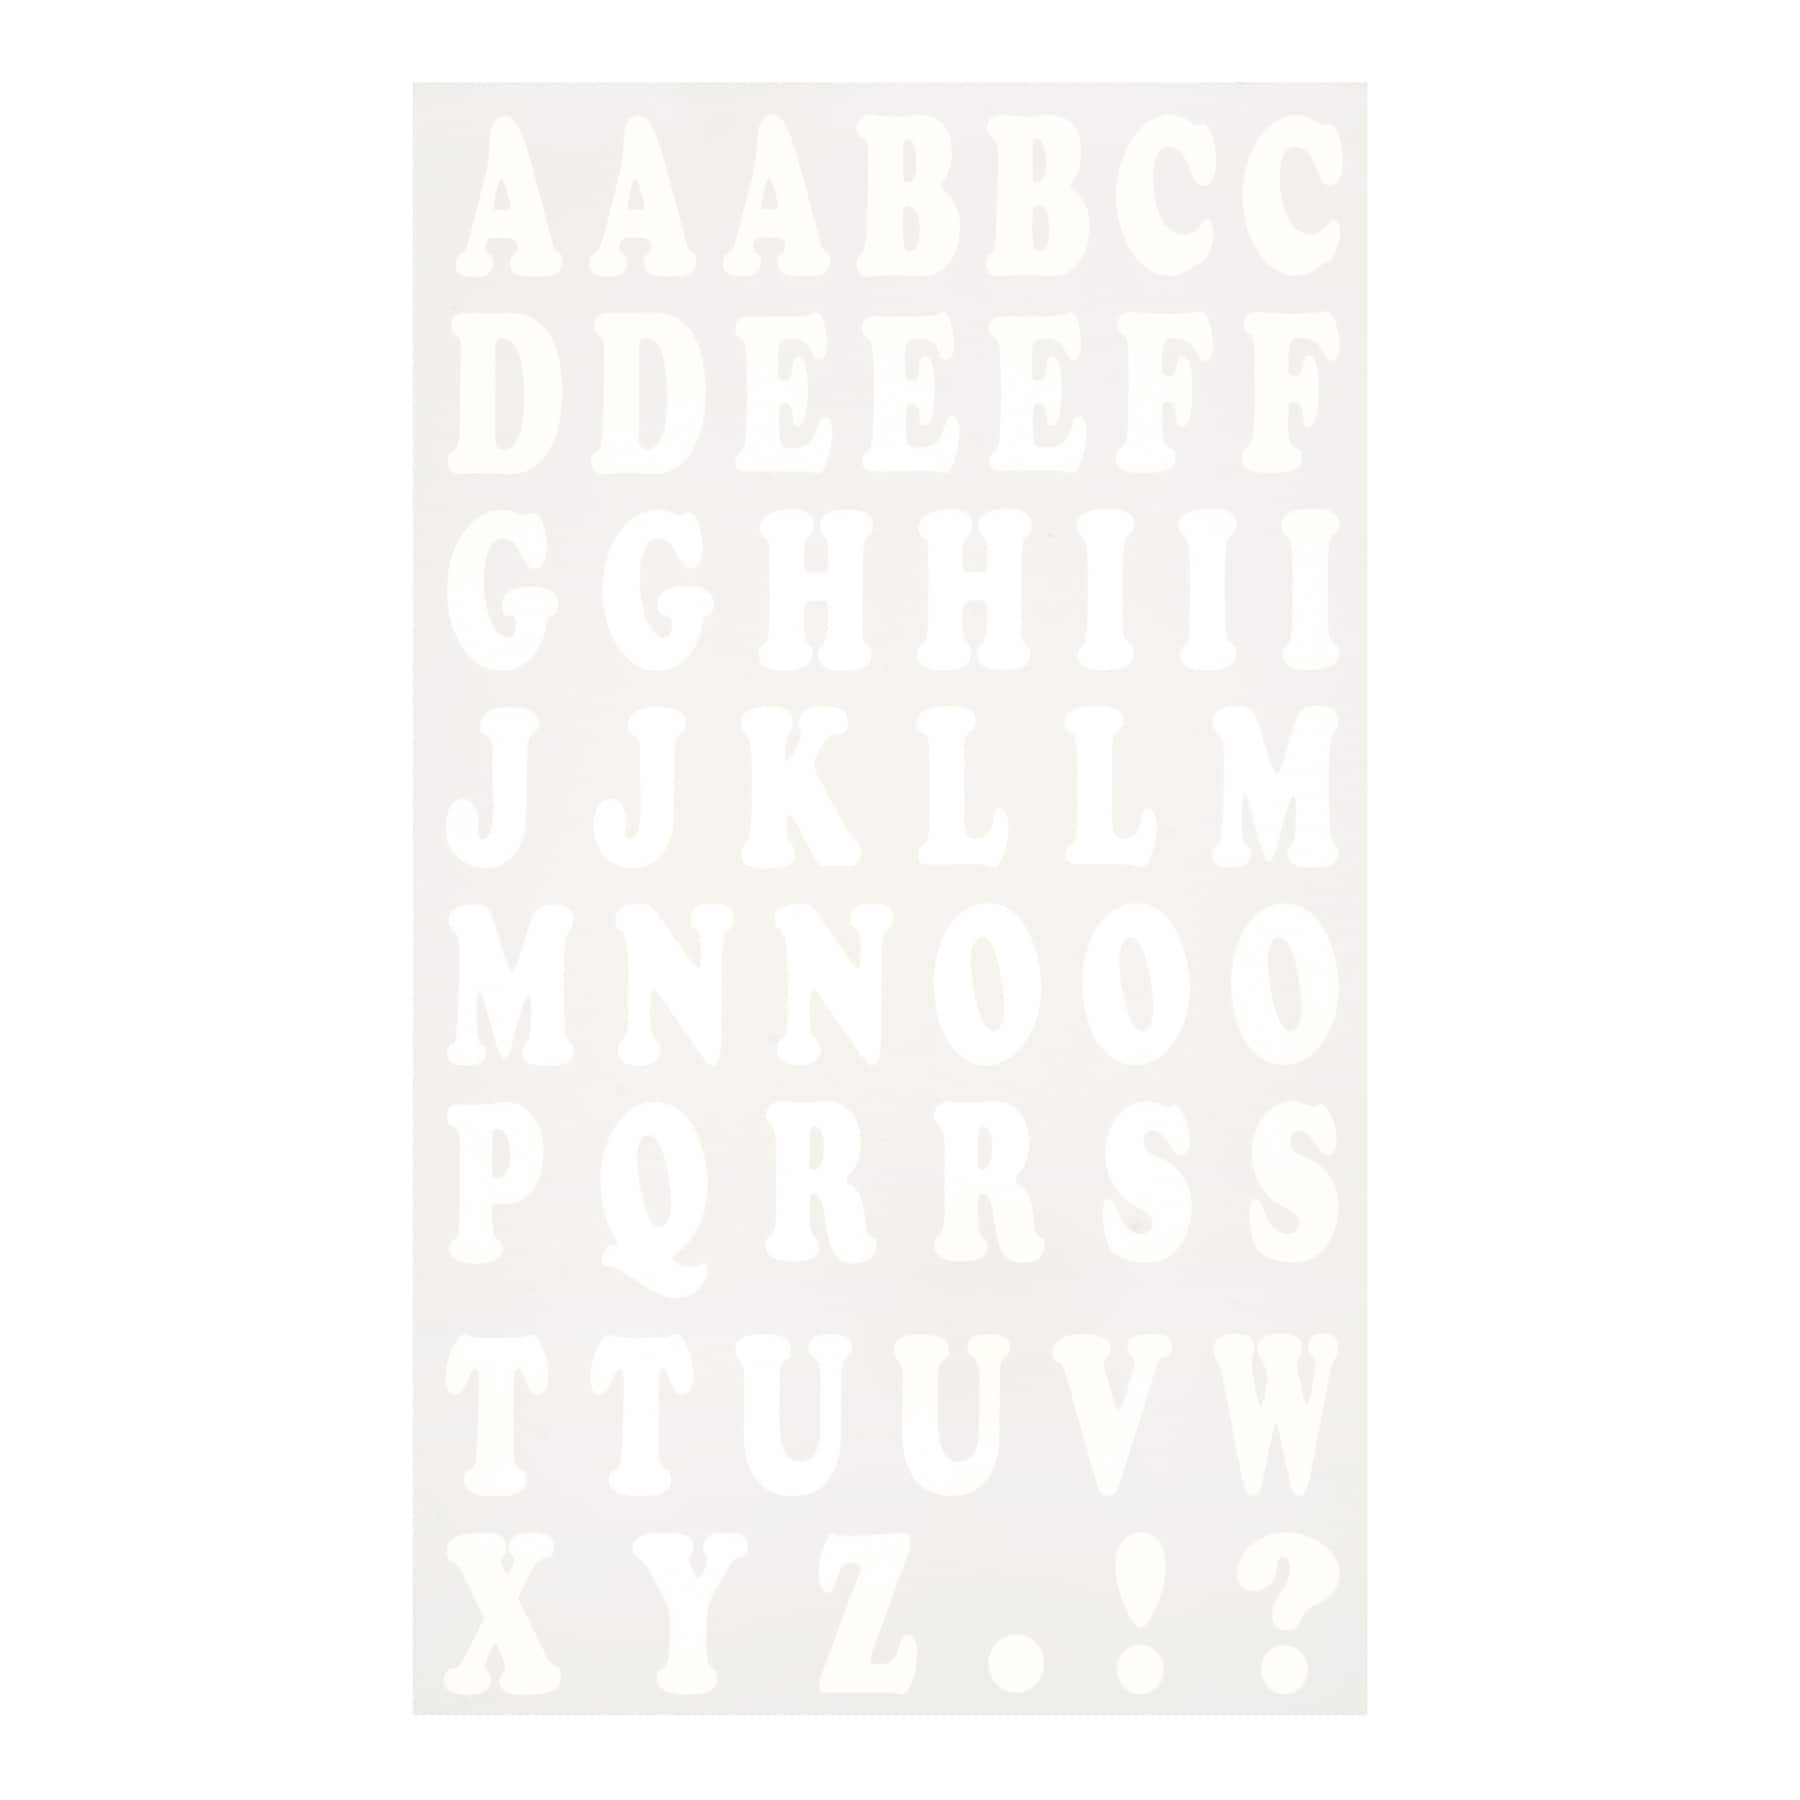 1.5 Iron-On Glitter Cooper Letters by Make Market®, Michaels